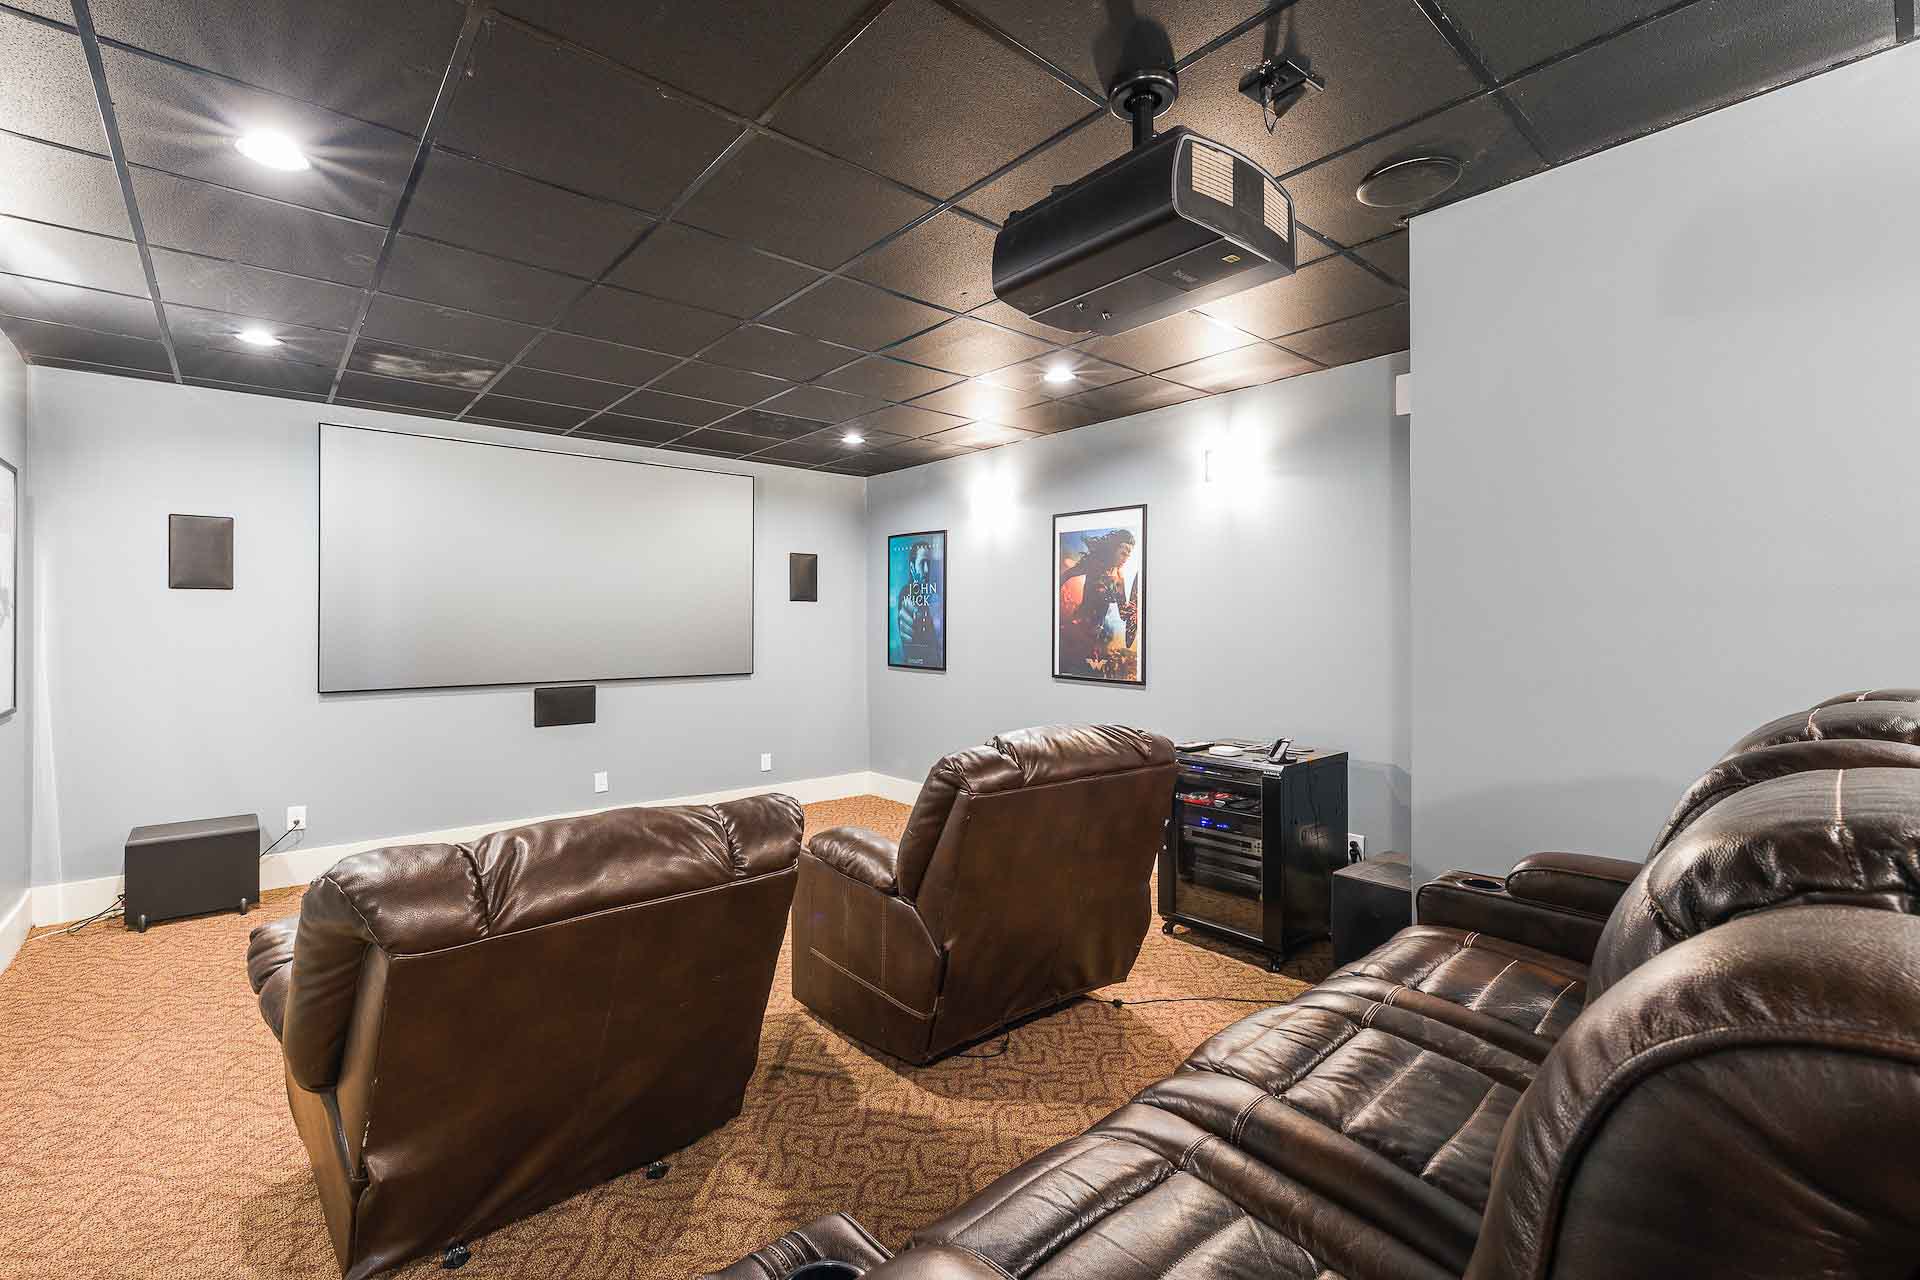 Own Home theater